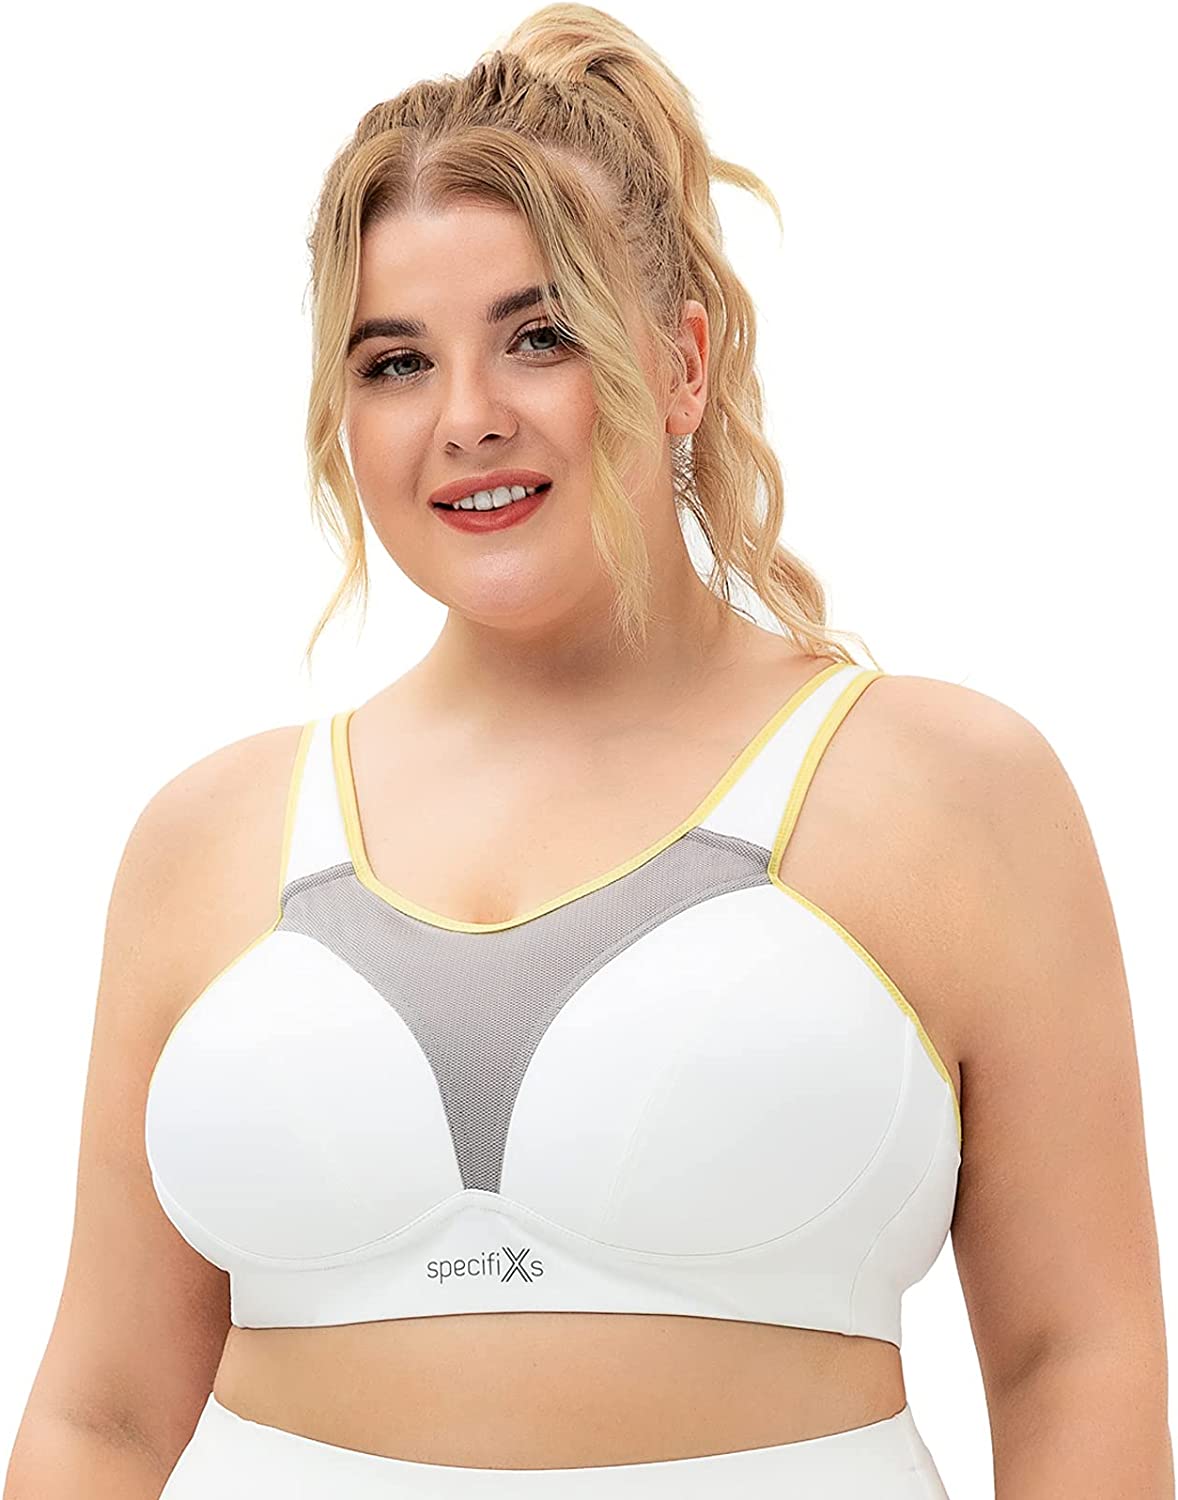 specifixs Sports Bras for Women Plus Size High Impact Full Coverage  All-Round Support for Running